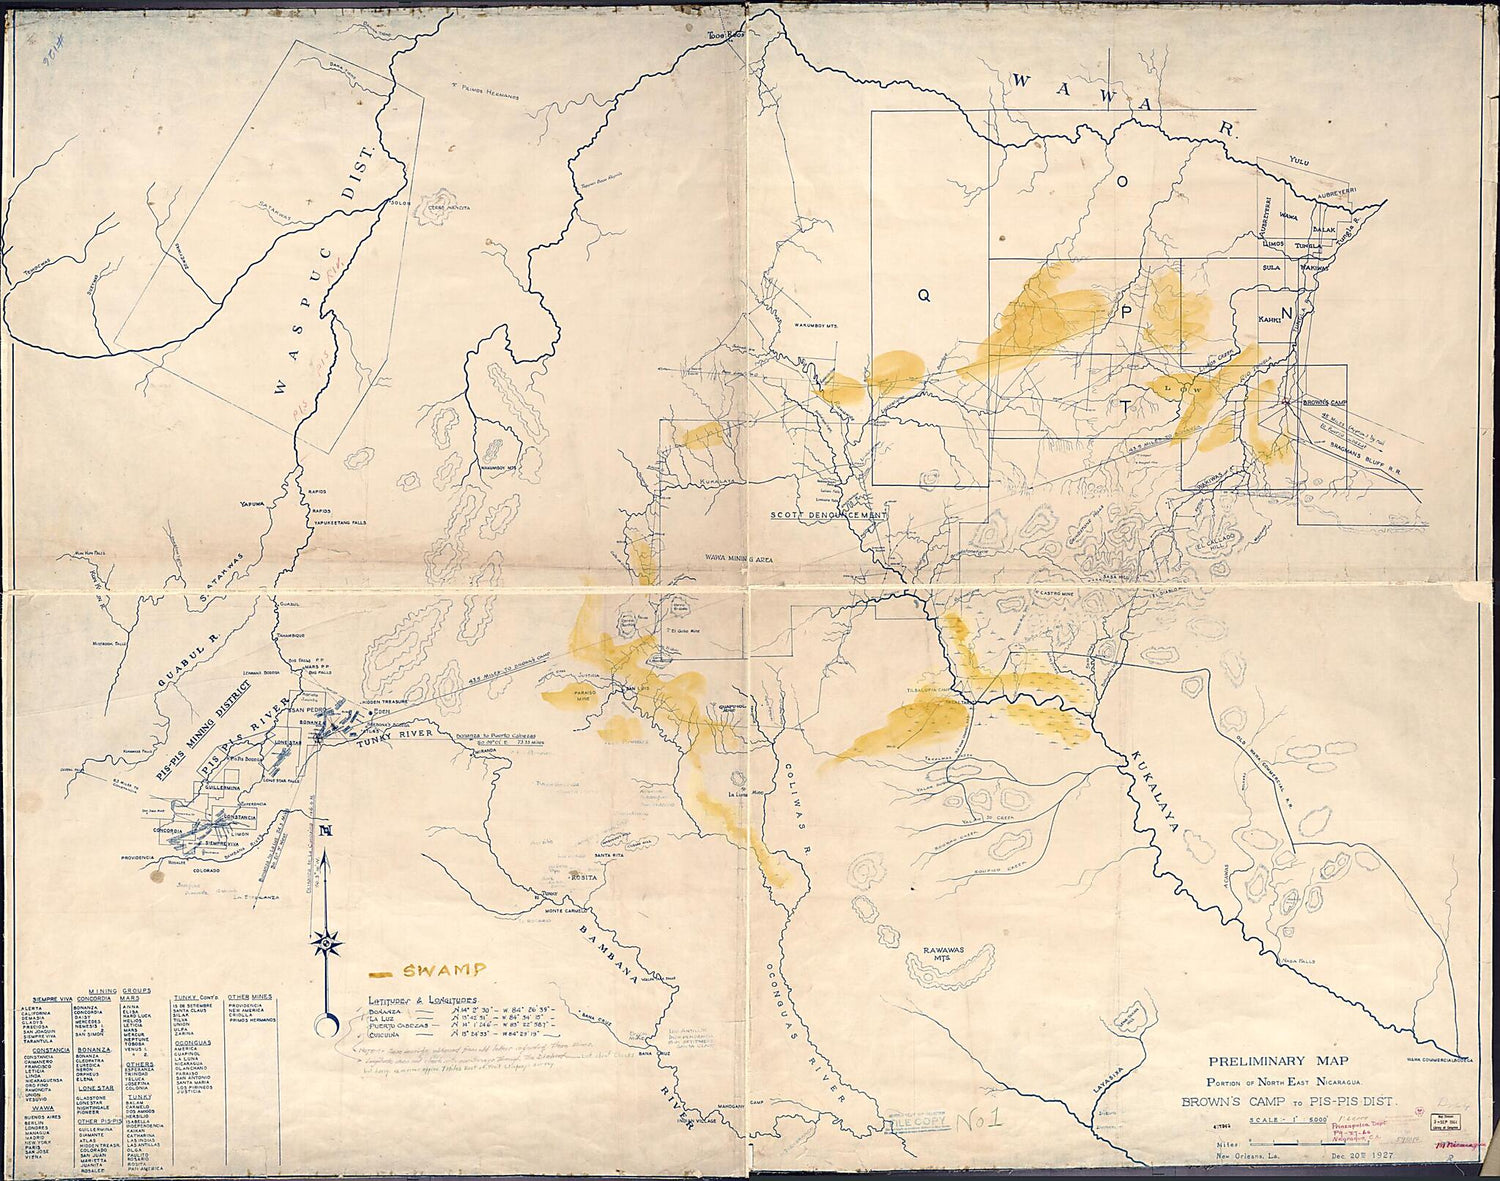 This old map of Pis Dist. (Preliminary Map, Portion of Northeast Nicaragua) from 1927 was created by  in 1927